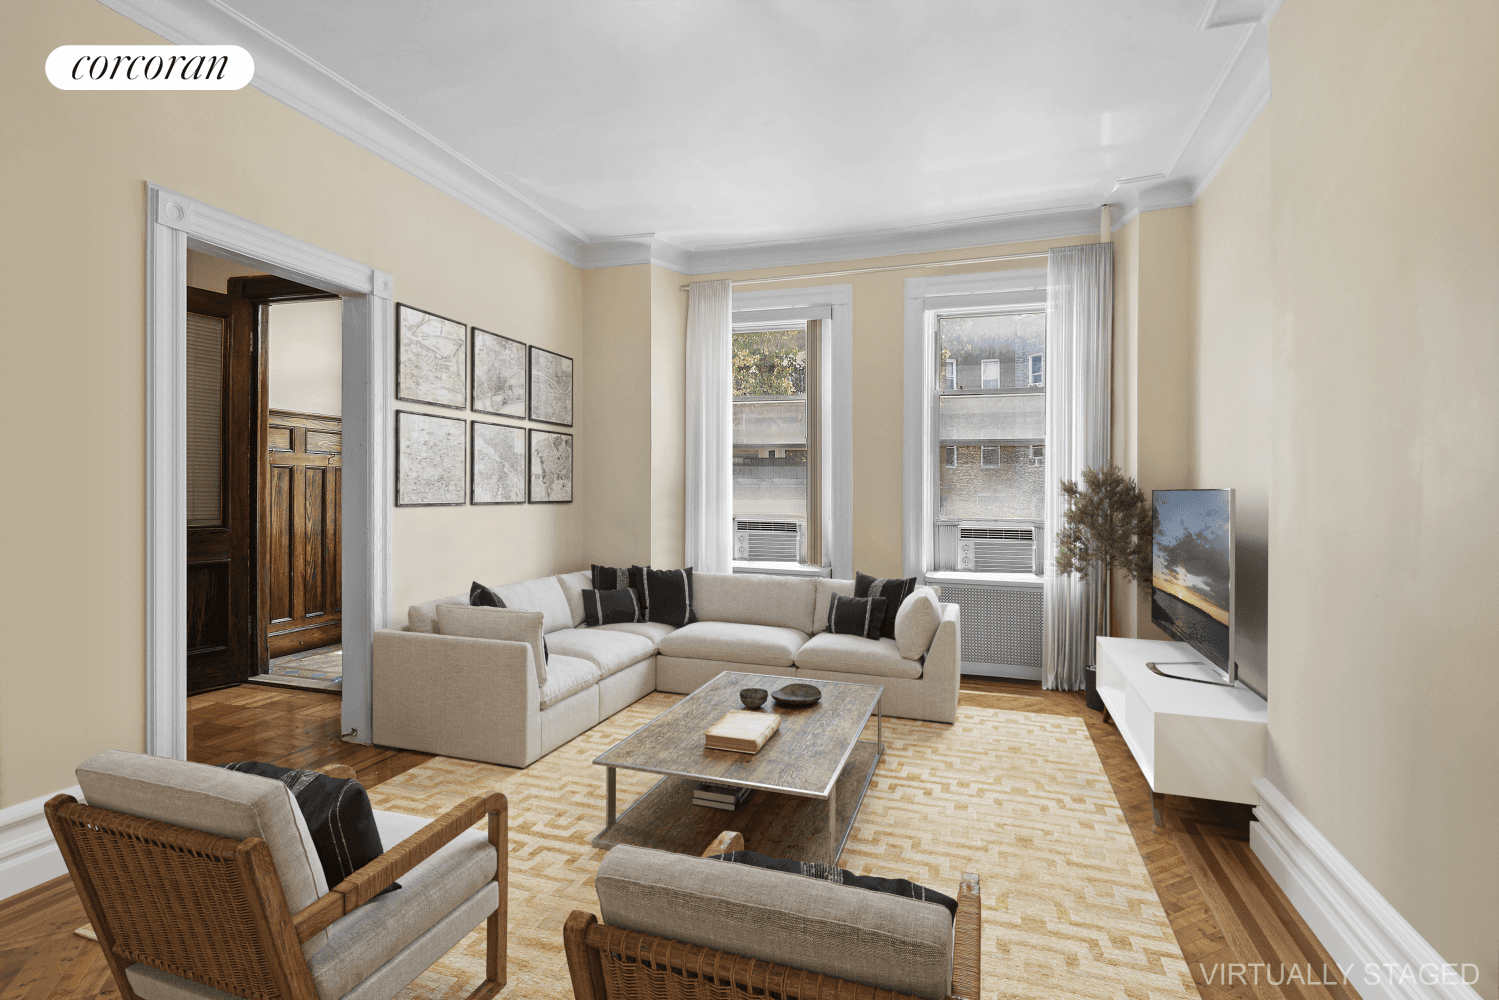 Right on Doctor's Row, Welcome to 333 Bay Ridge Parkway, a stunning single family mixed use brick house offering an abundance of living space amp ; endless possibilities !